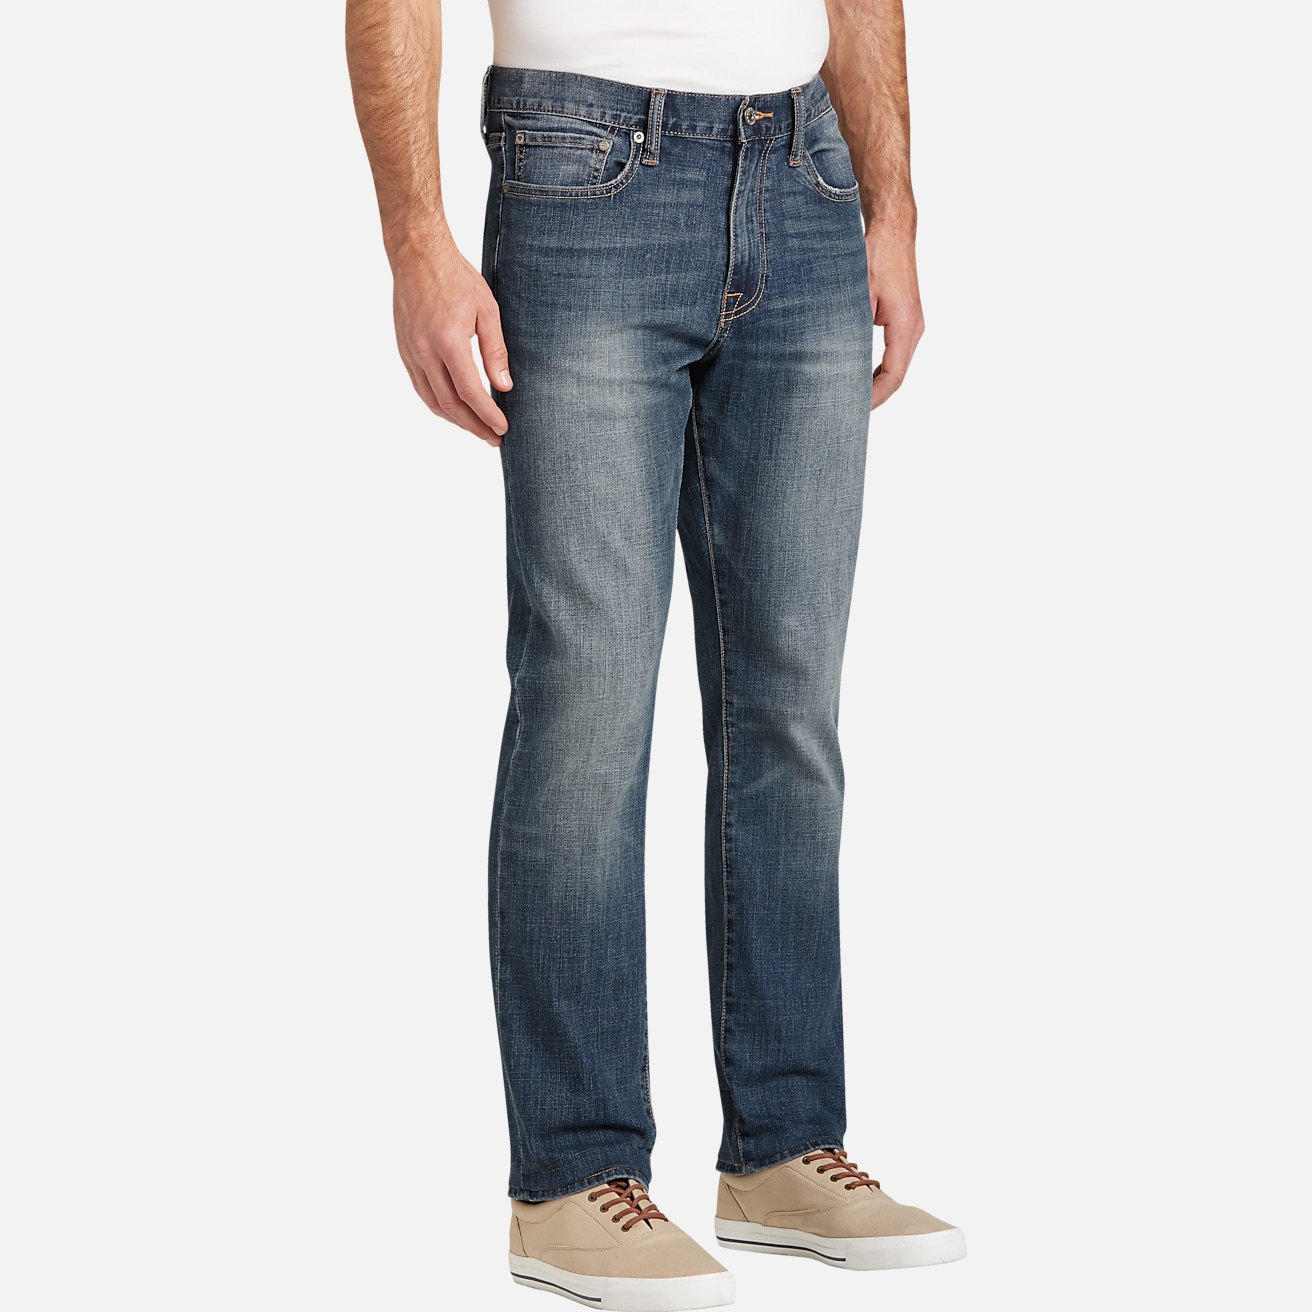 Lucky Brand 410 Arched Rock Athletic Fit Jeans